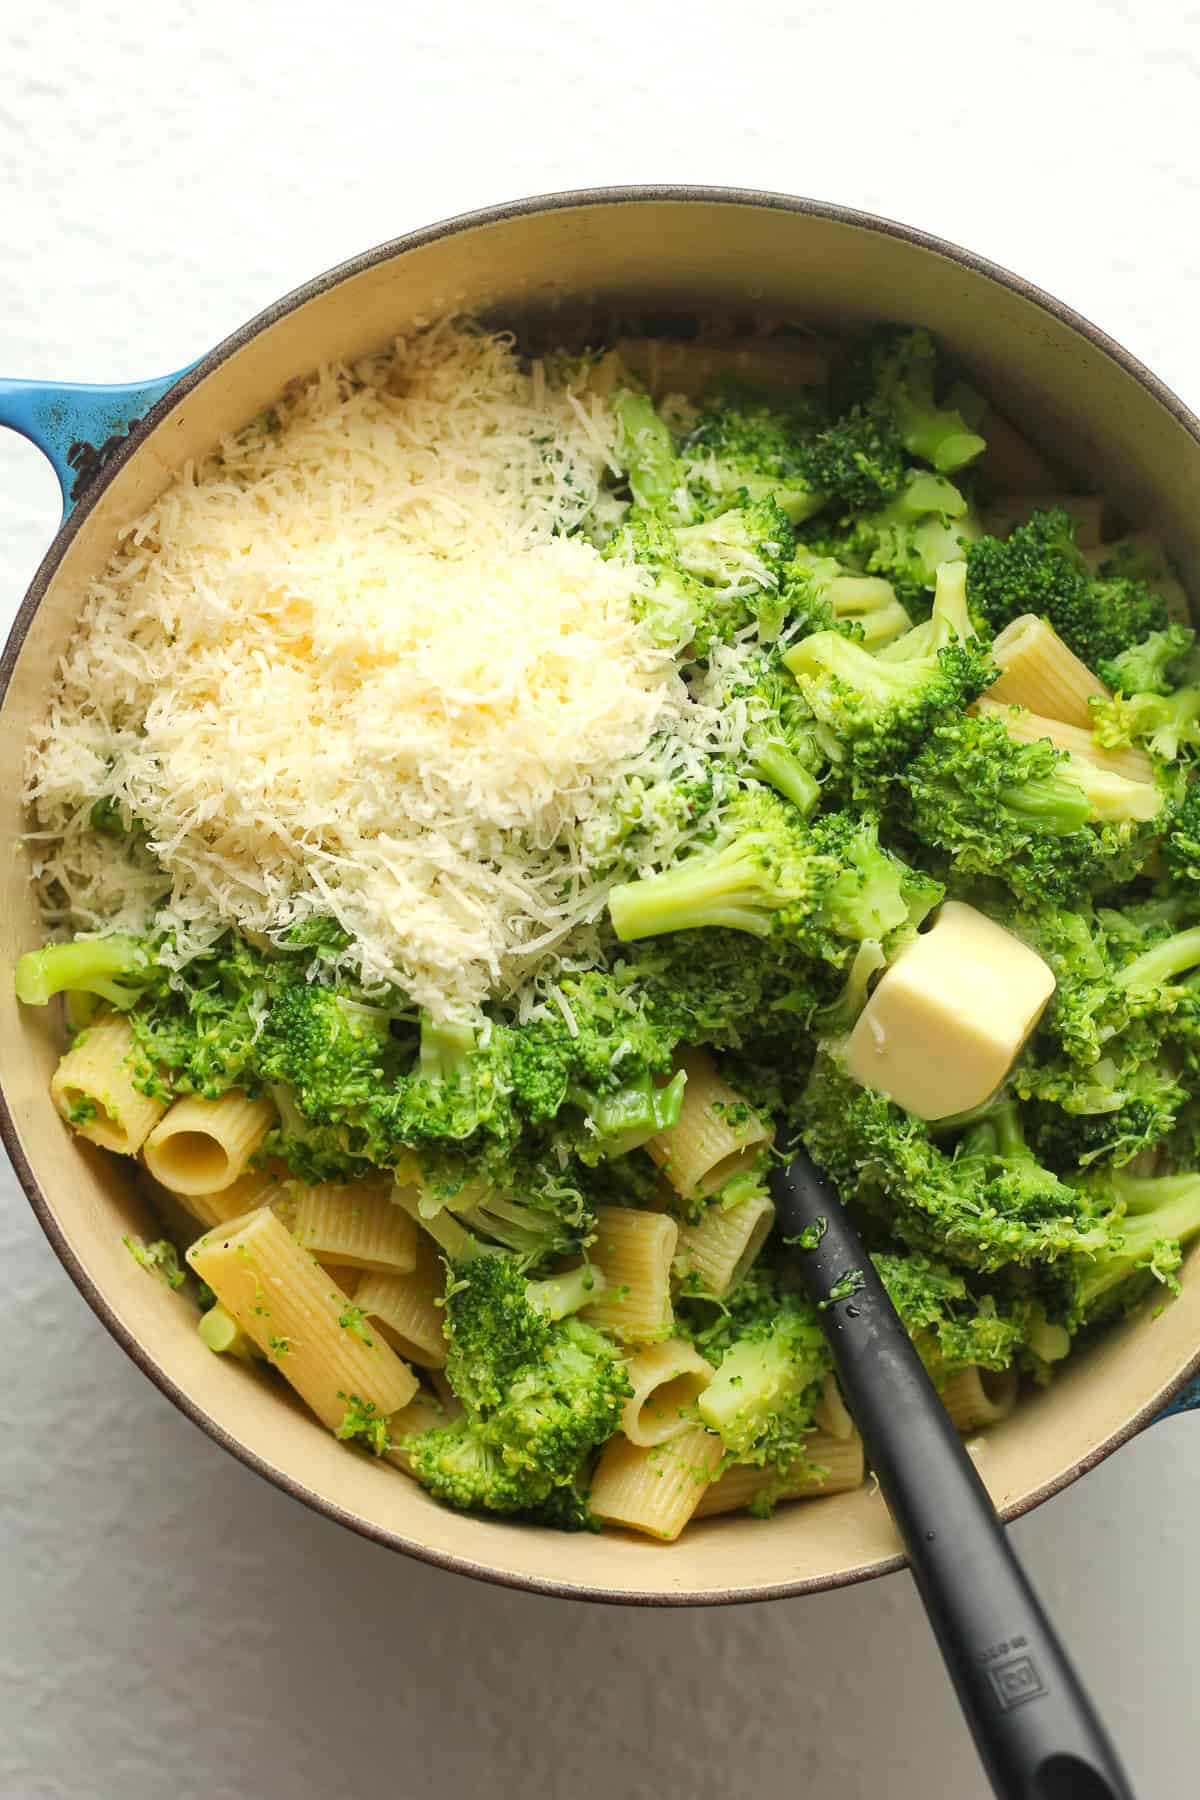 A stock pot of the pasta with broccoli and parmesan cheese on top.